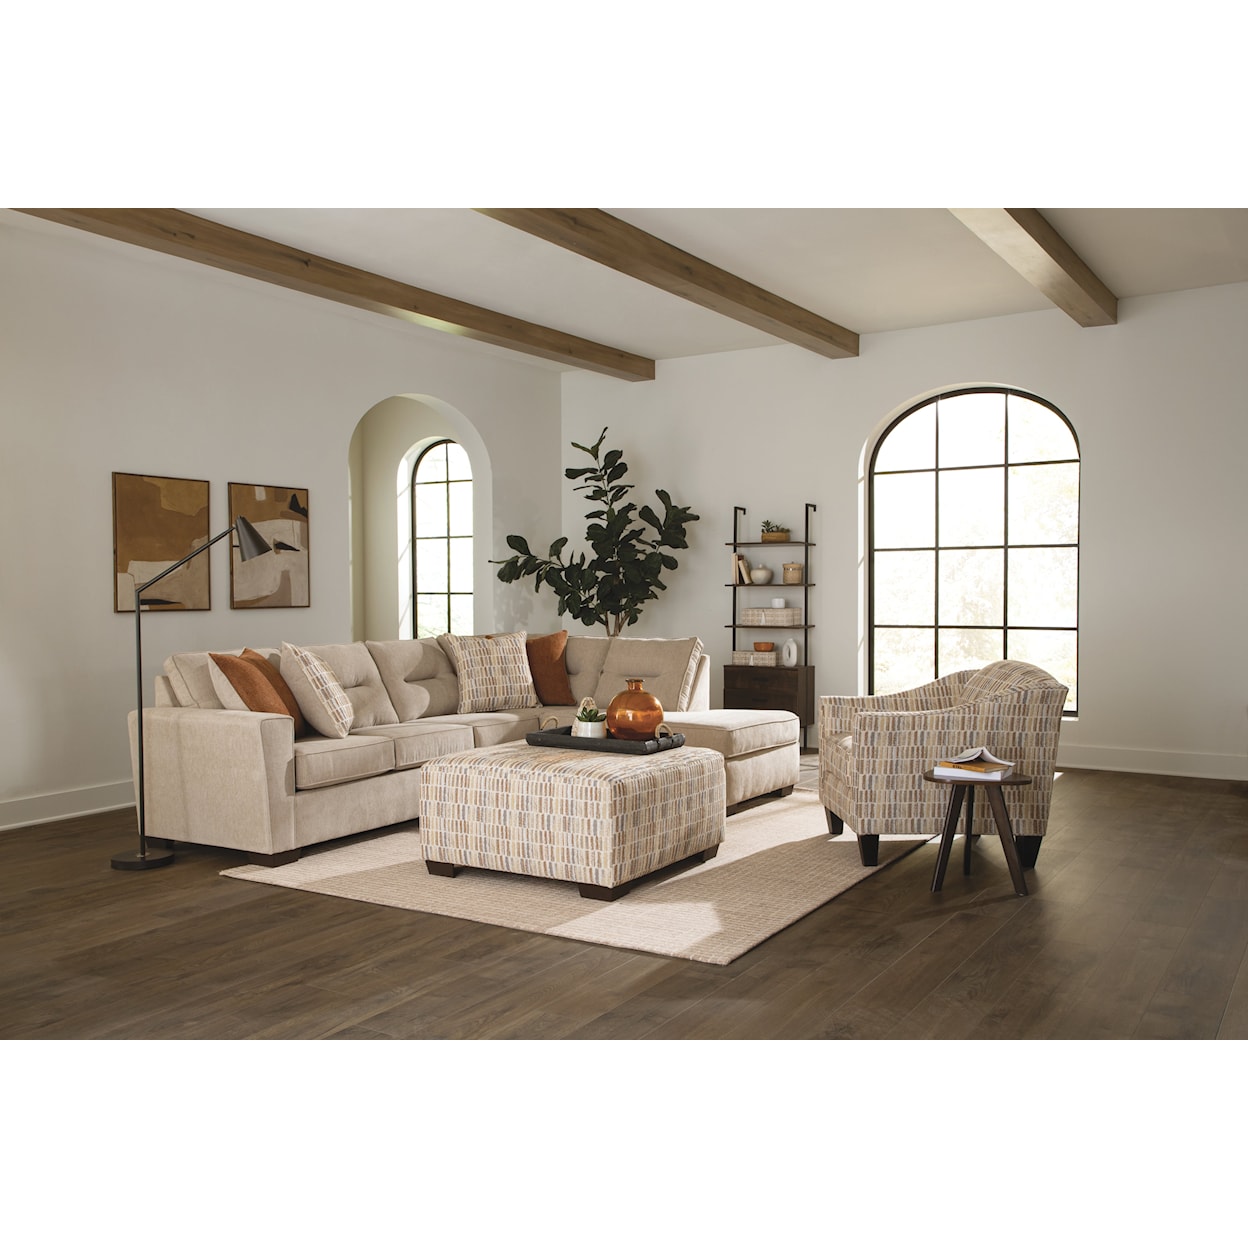 Behold Home 2259 Bono Muslin Sectional 2-Piece Sectional Sofa